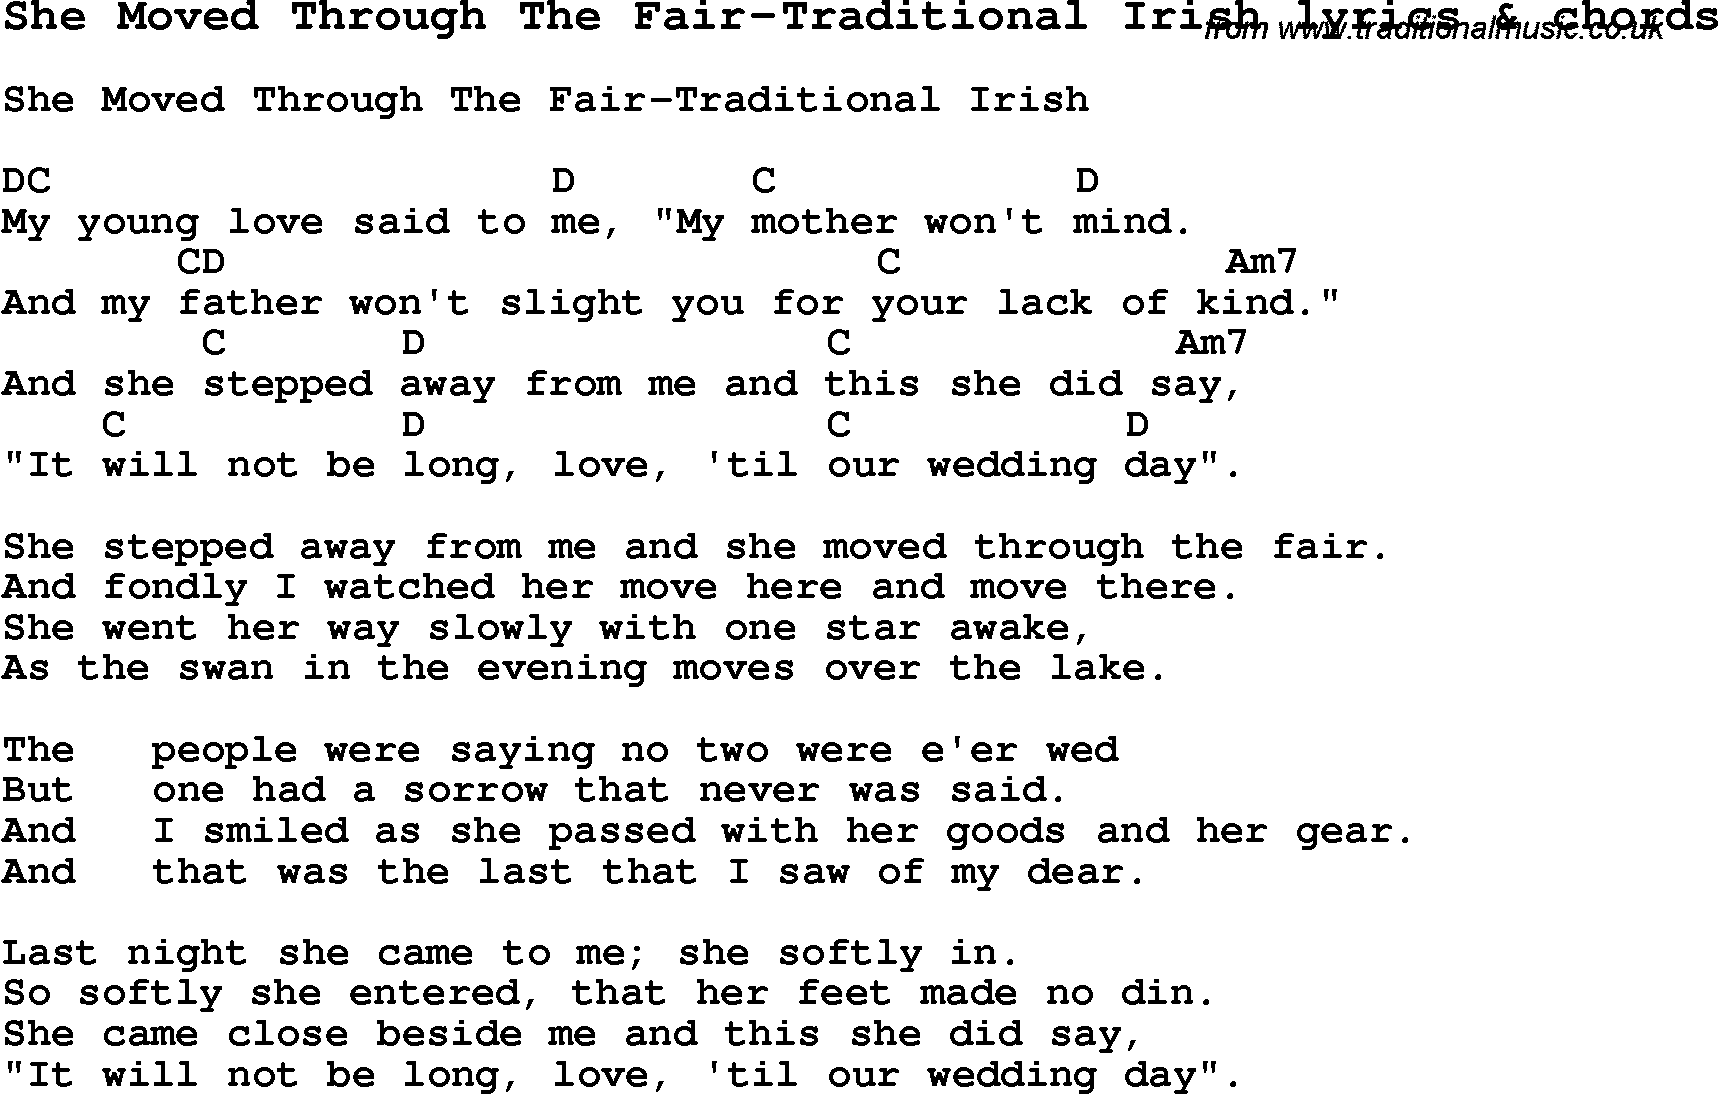 Love Song Lyrics for: She Moved Through The Fair-Traditional Irish with chords for Ukulele, Guitar Banjo etc.